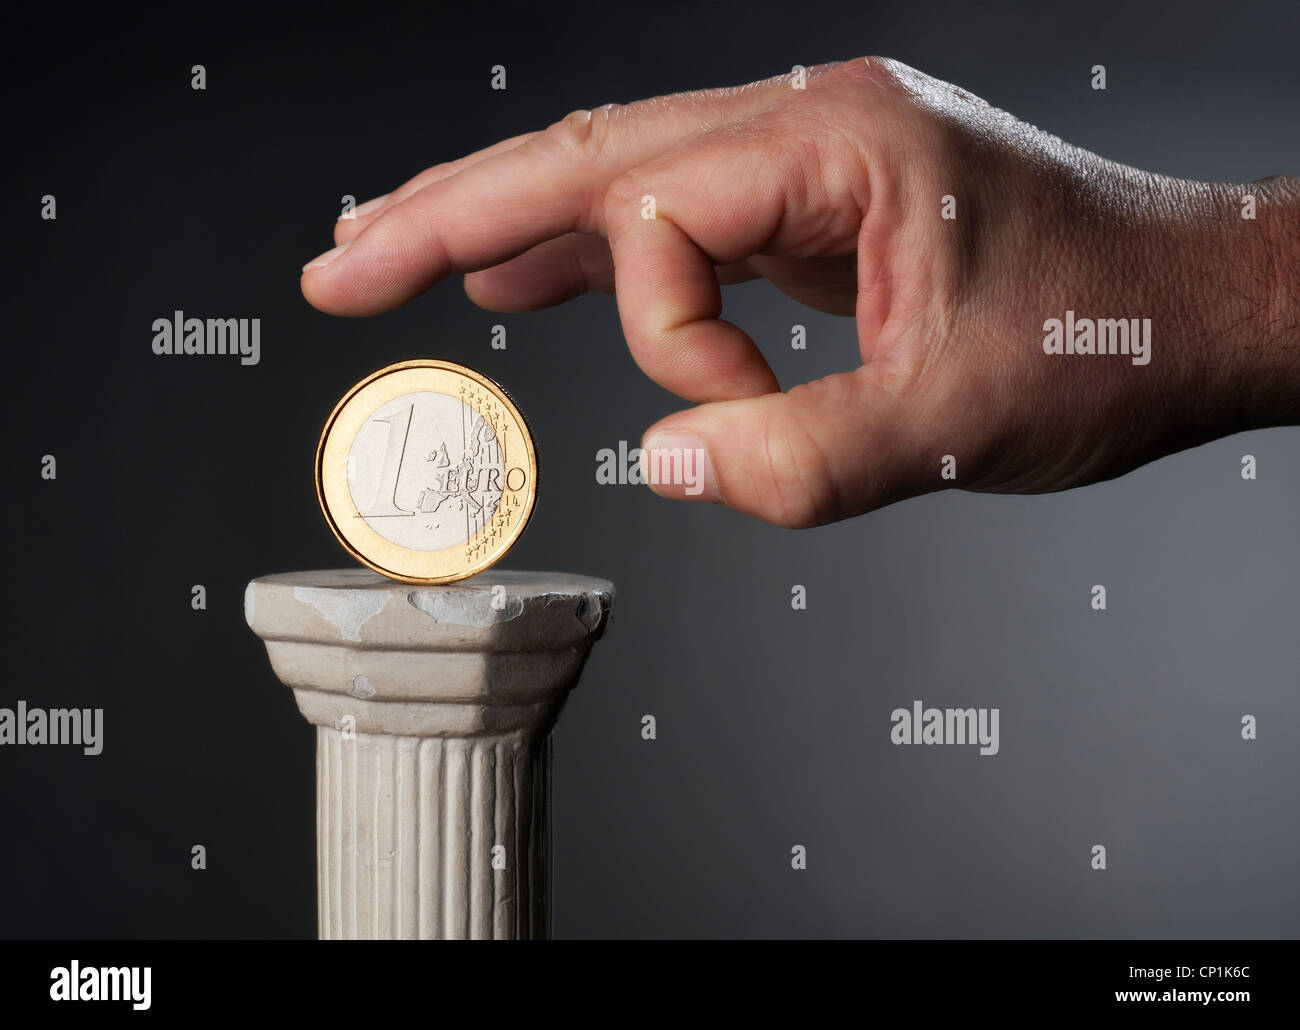 Closeup of a hand that attaches to snap a € coin from a stack. Stock Photo